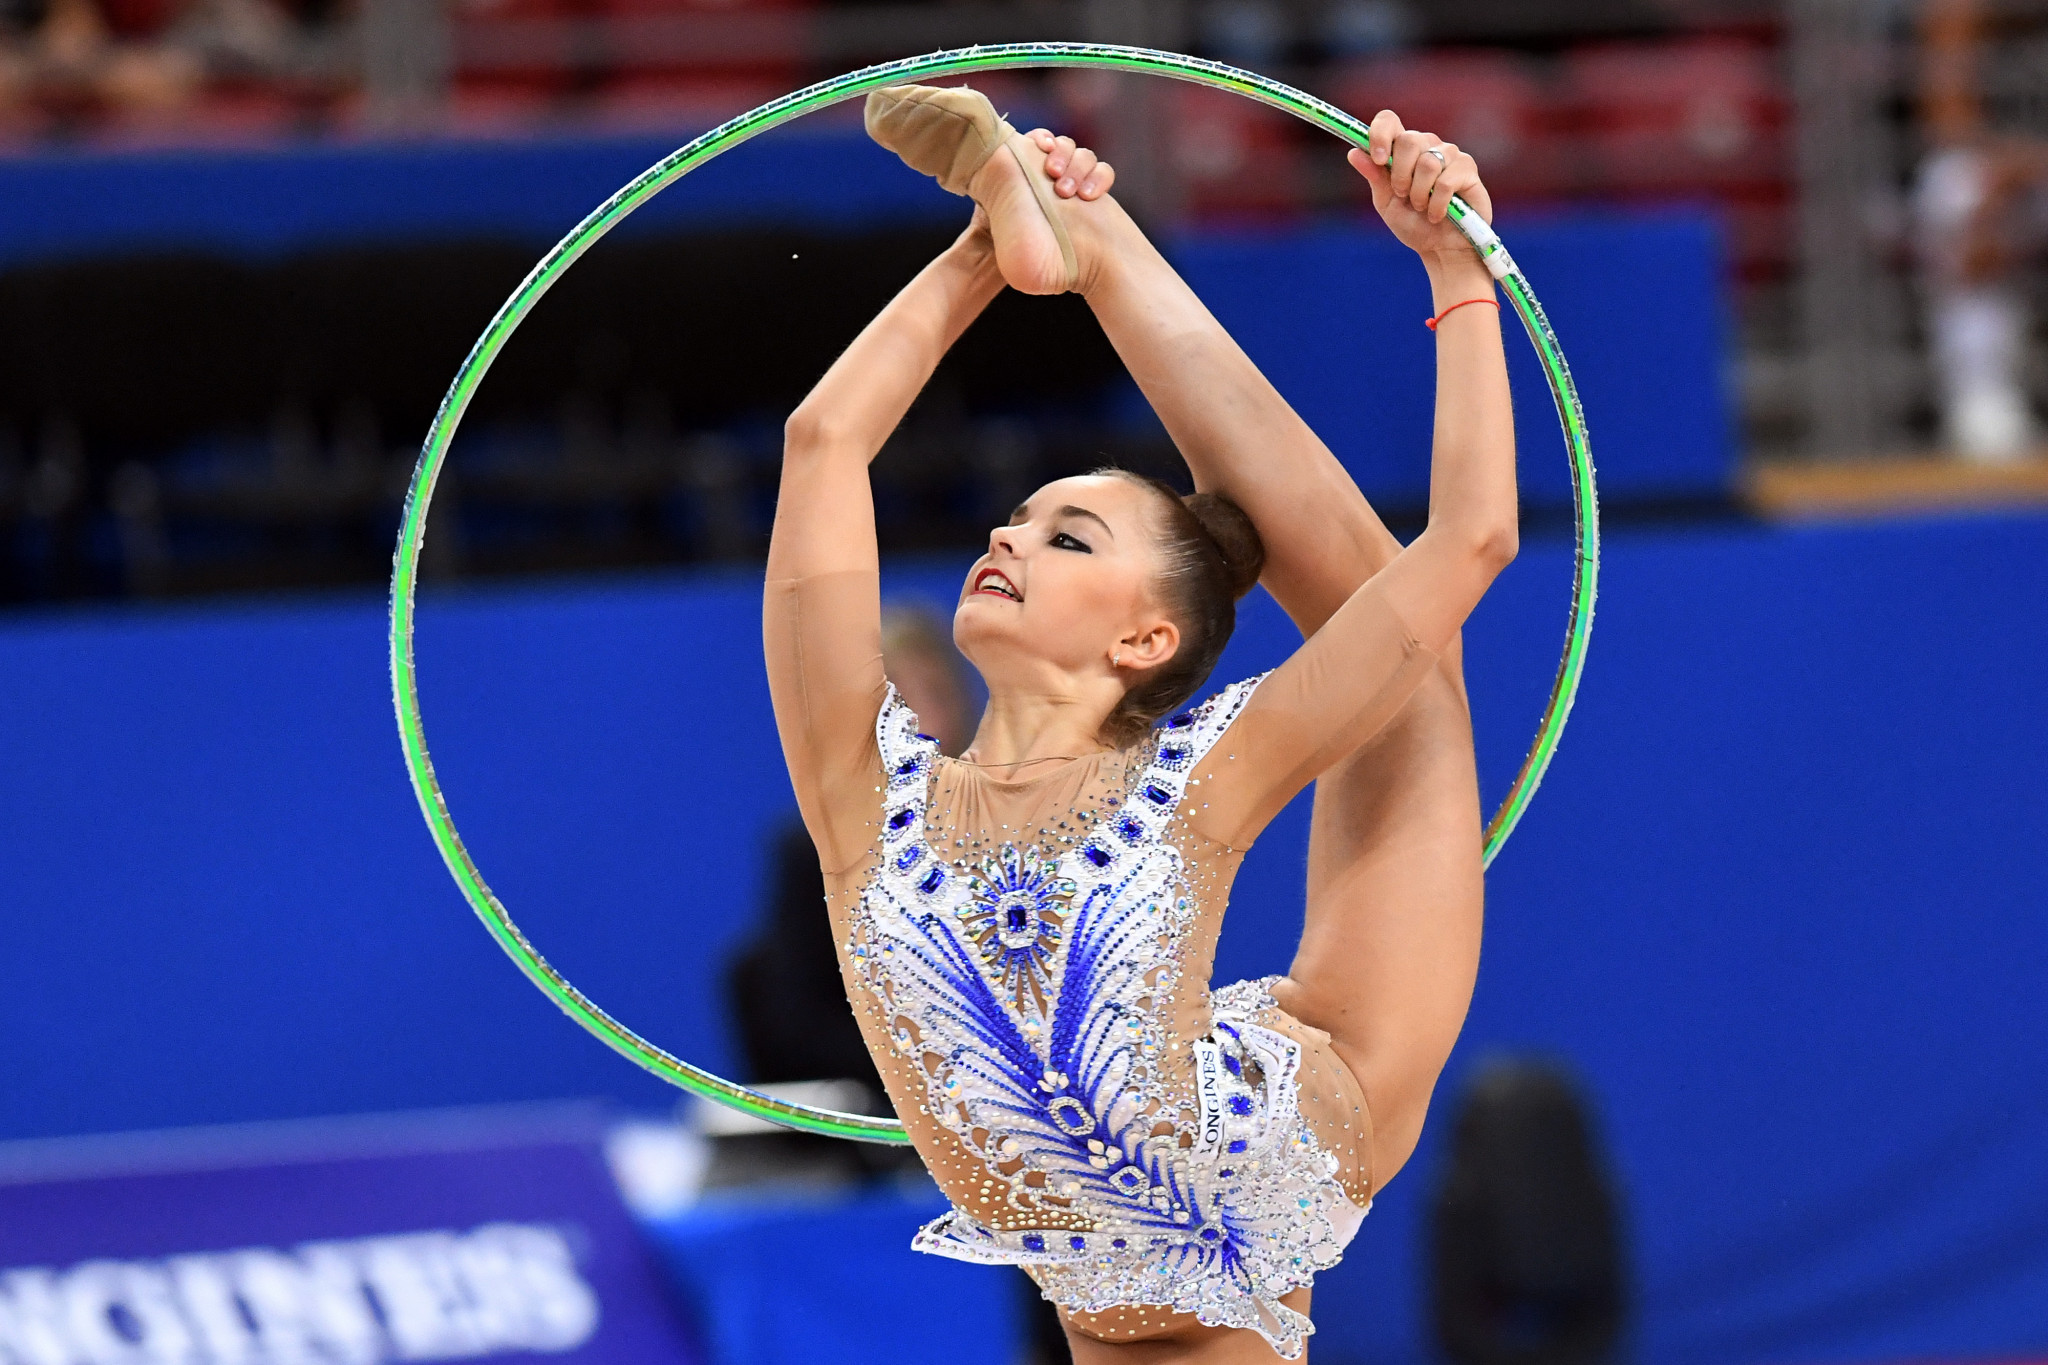 Russia's Averina takes first place in hoop and ball qualification at Rhythmic Gymnastics European Championships 